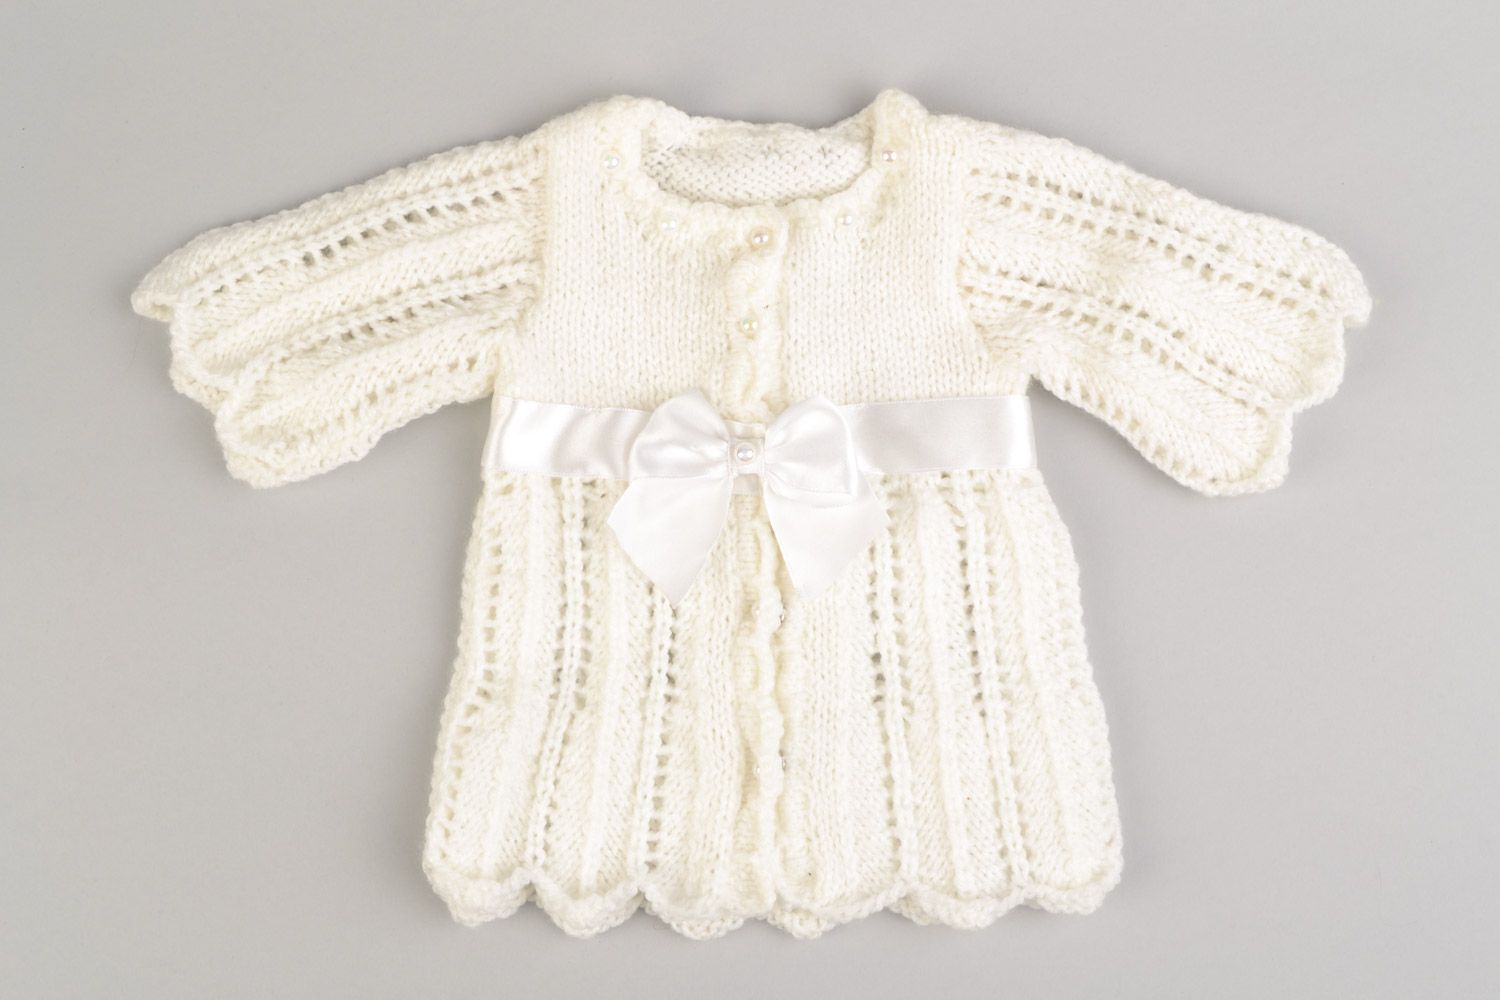 Knitted handmade white baby dress made of acrylic yarns with long sleeves  photo 1